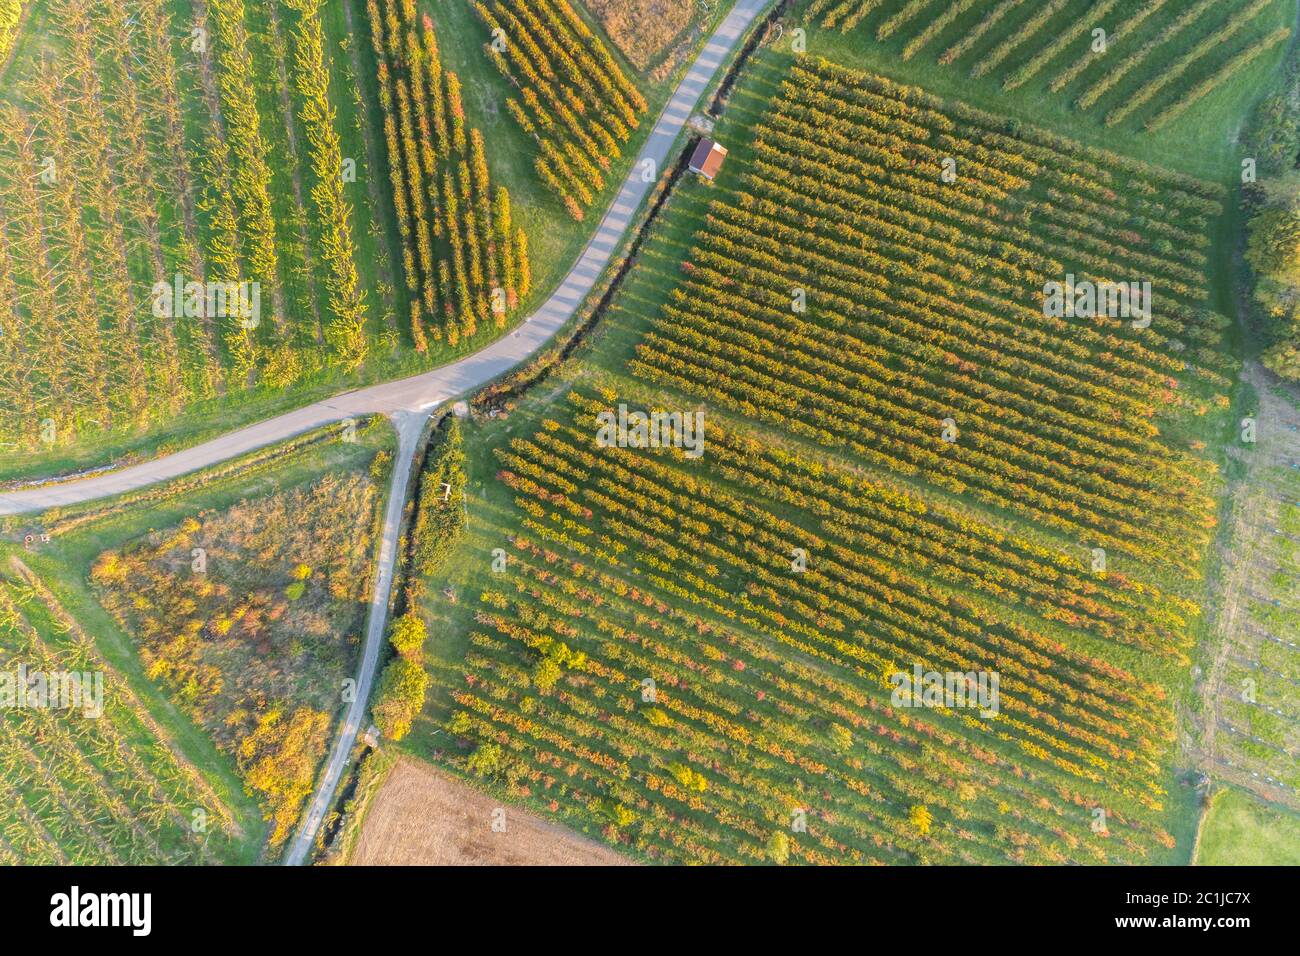 bird view of an orchard in autumn Stock Photo